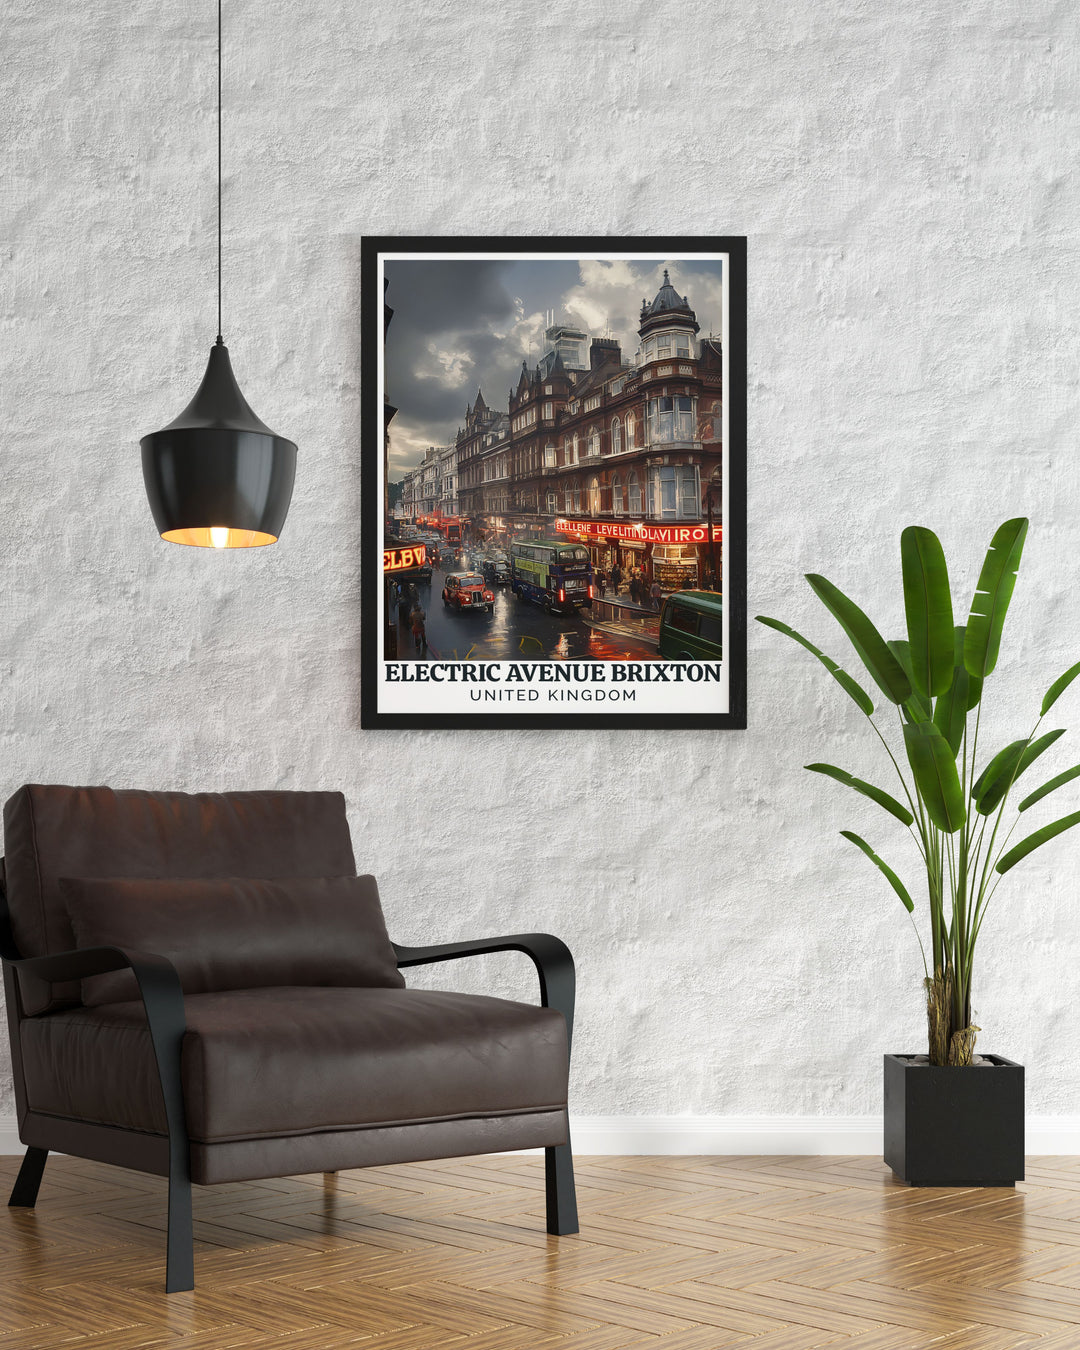 This art print of Electric Avenue showcases the streets dynamic energy and vibrant market stalls, making it a standout piece for any decor.